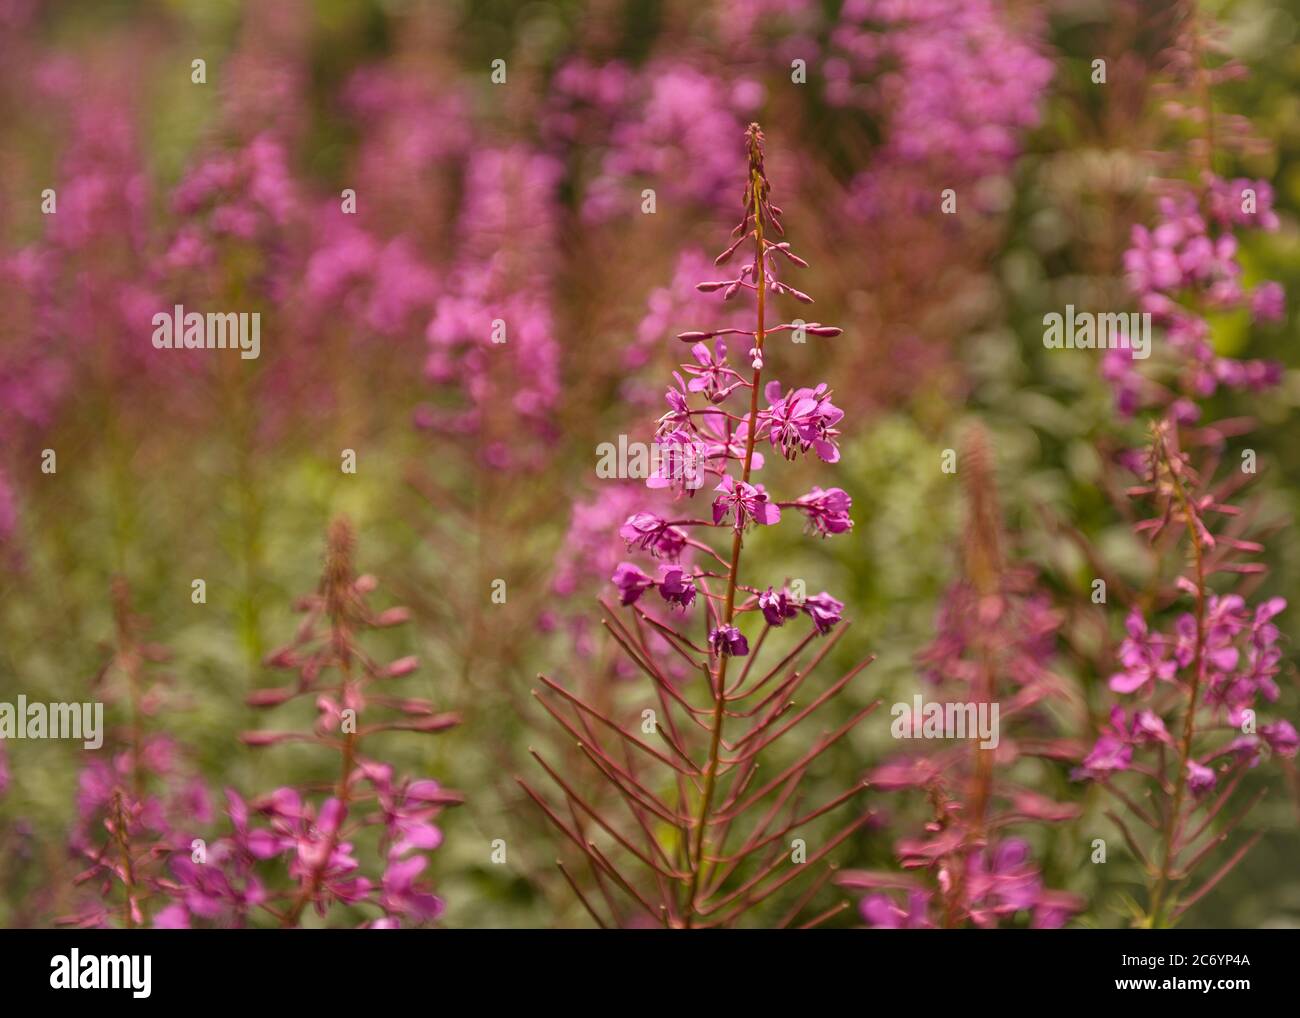 Field of pink flowers Stock Photo